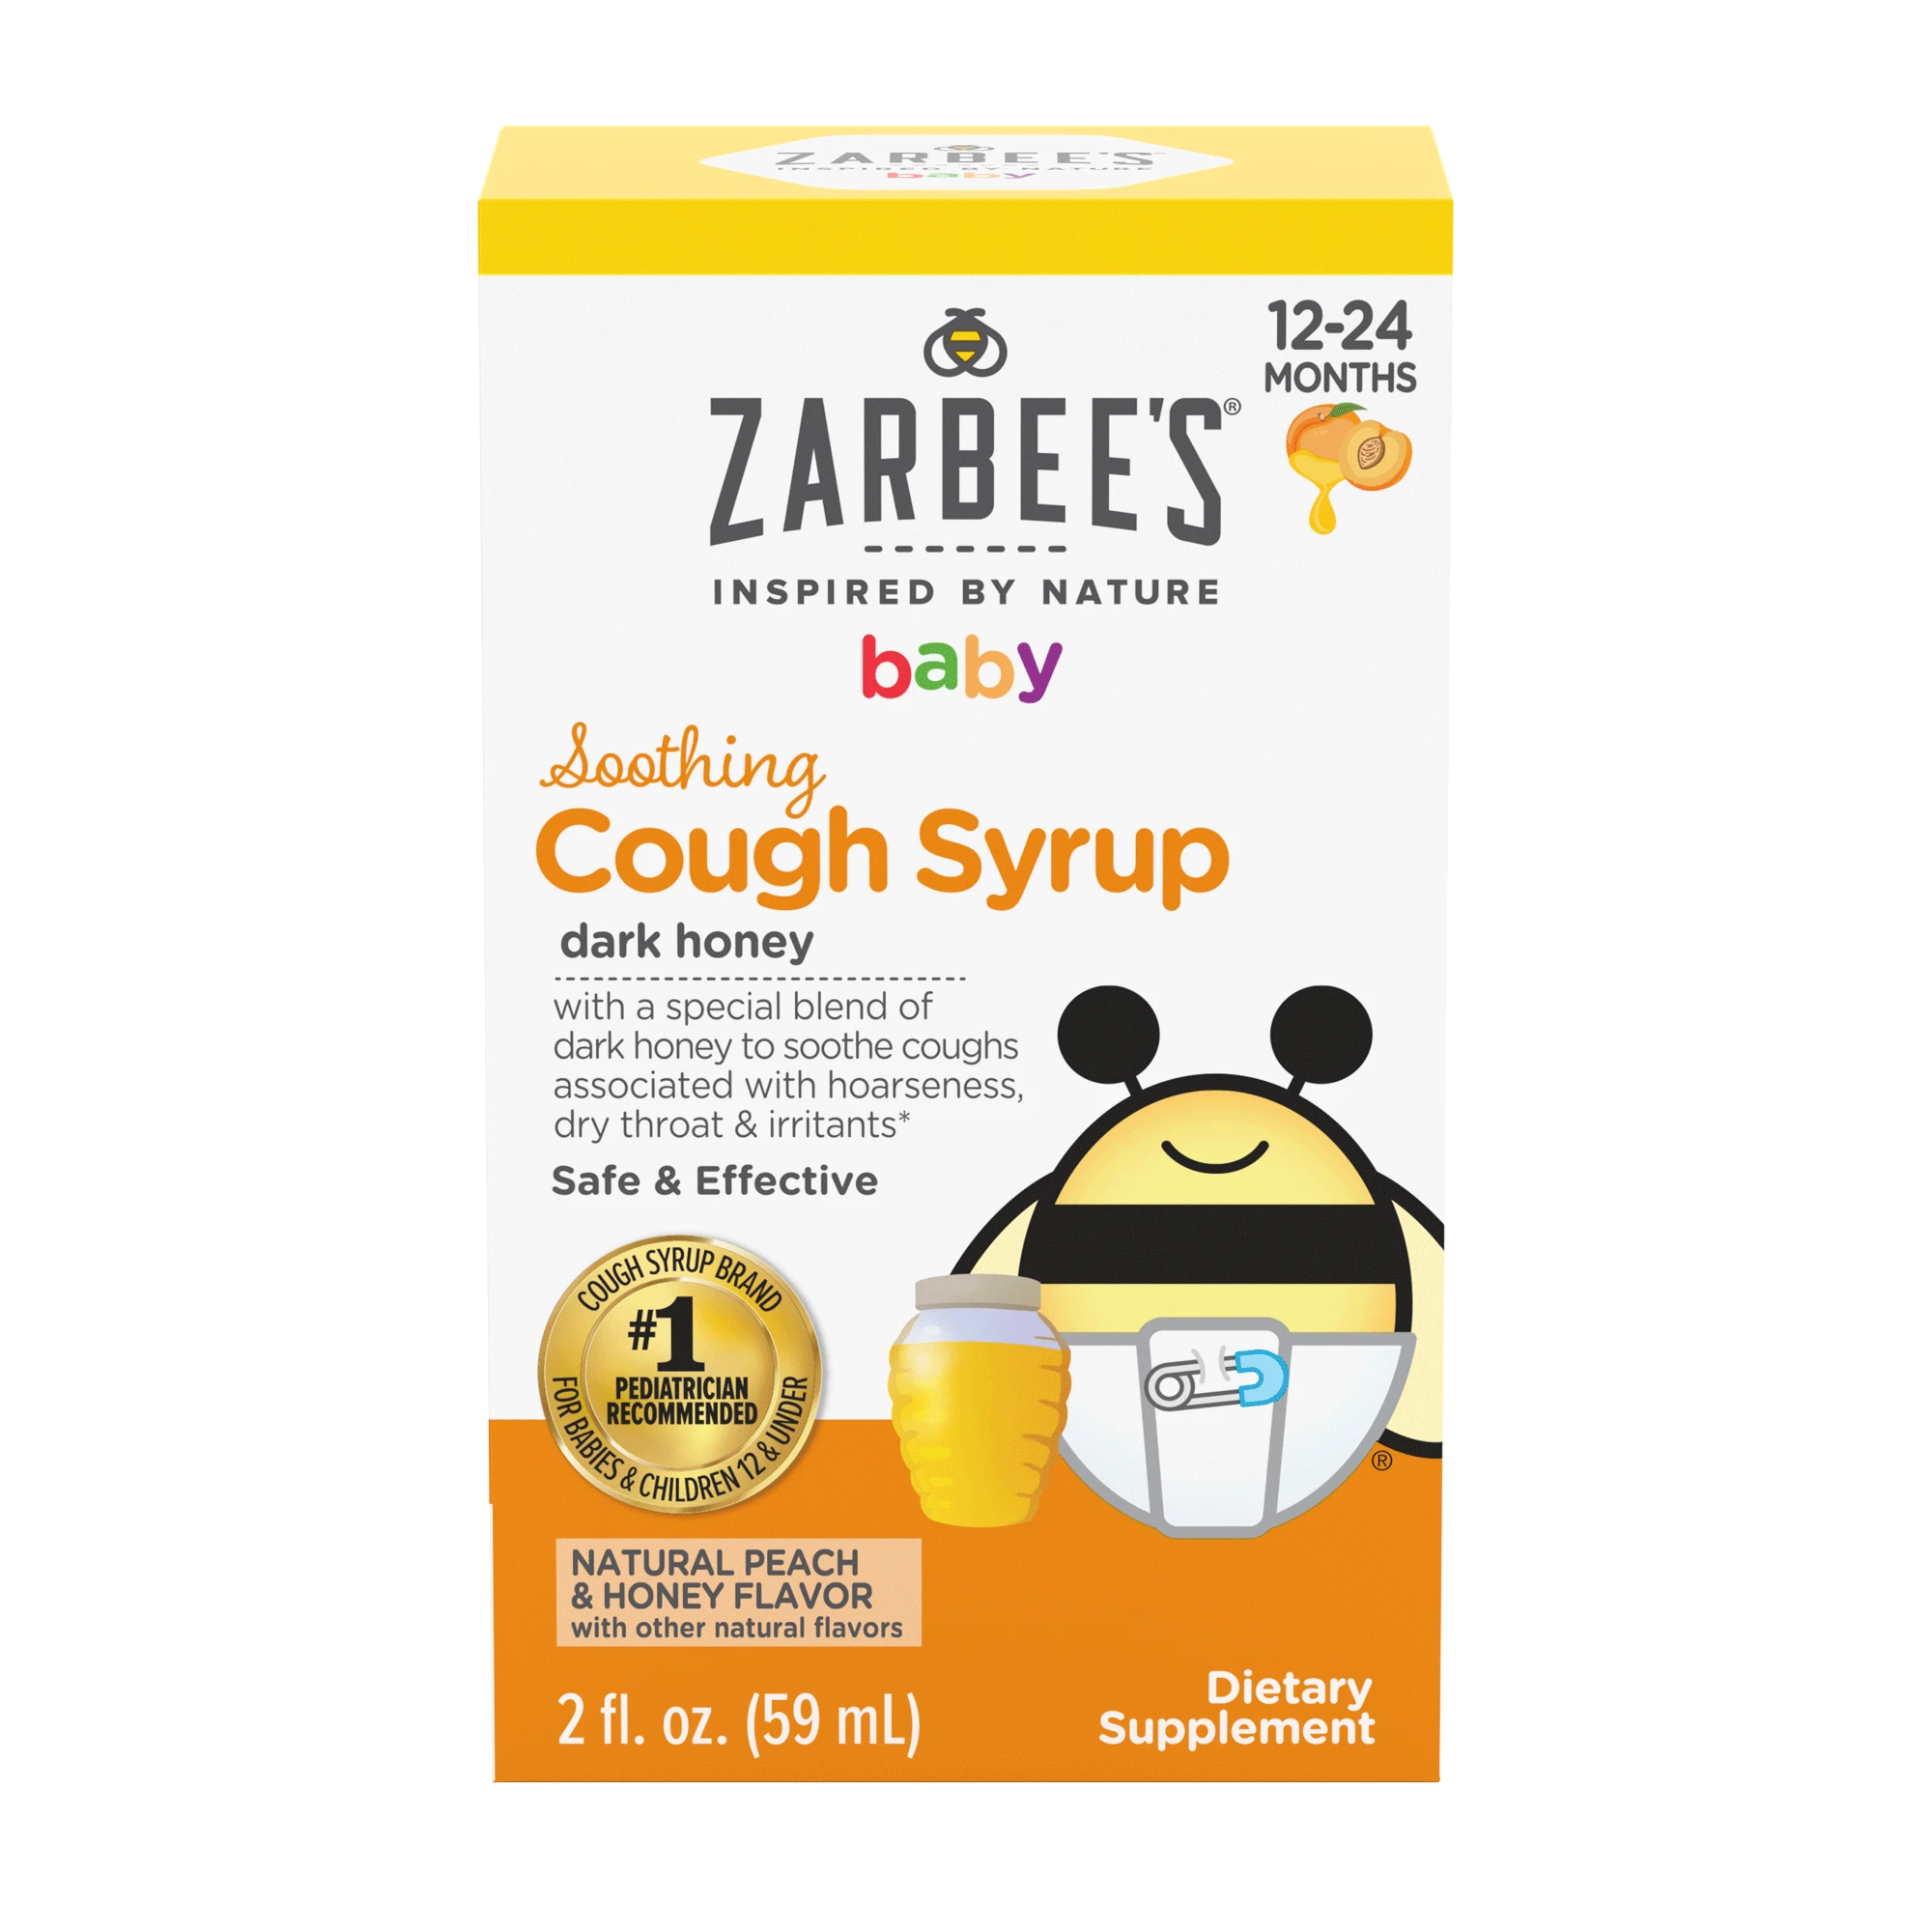 Front packaging of Zarbee’s® Inspired by Nature Soothing Cough Syrup in natural peach & honey flavor